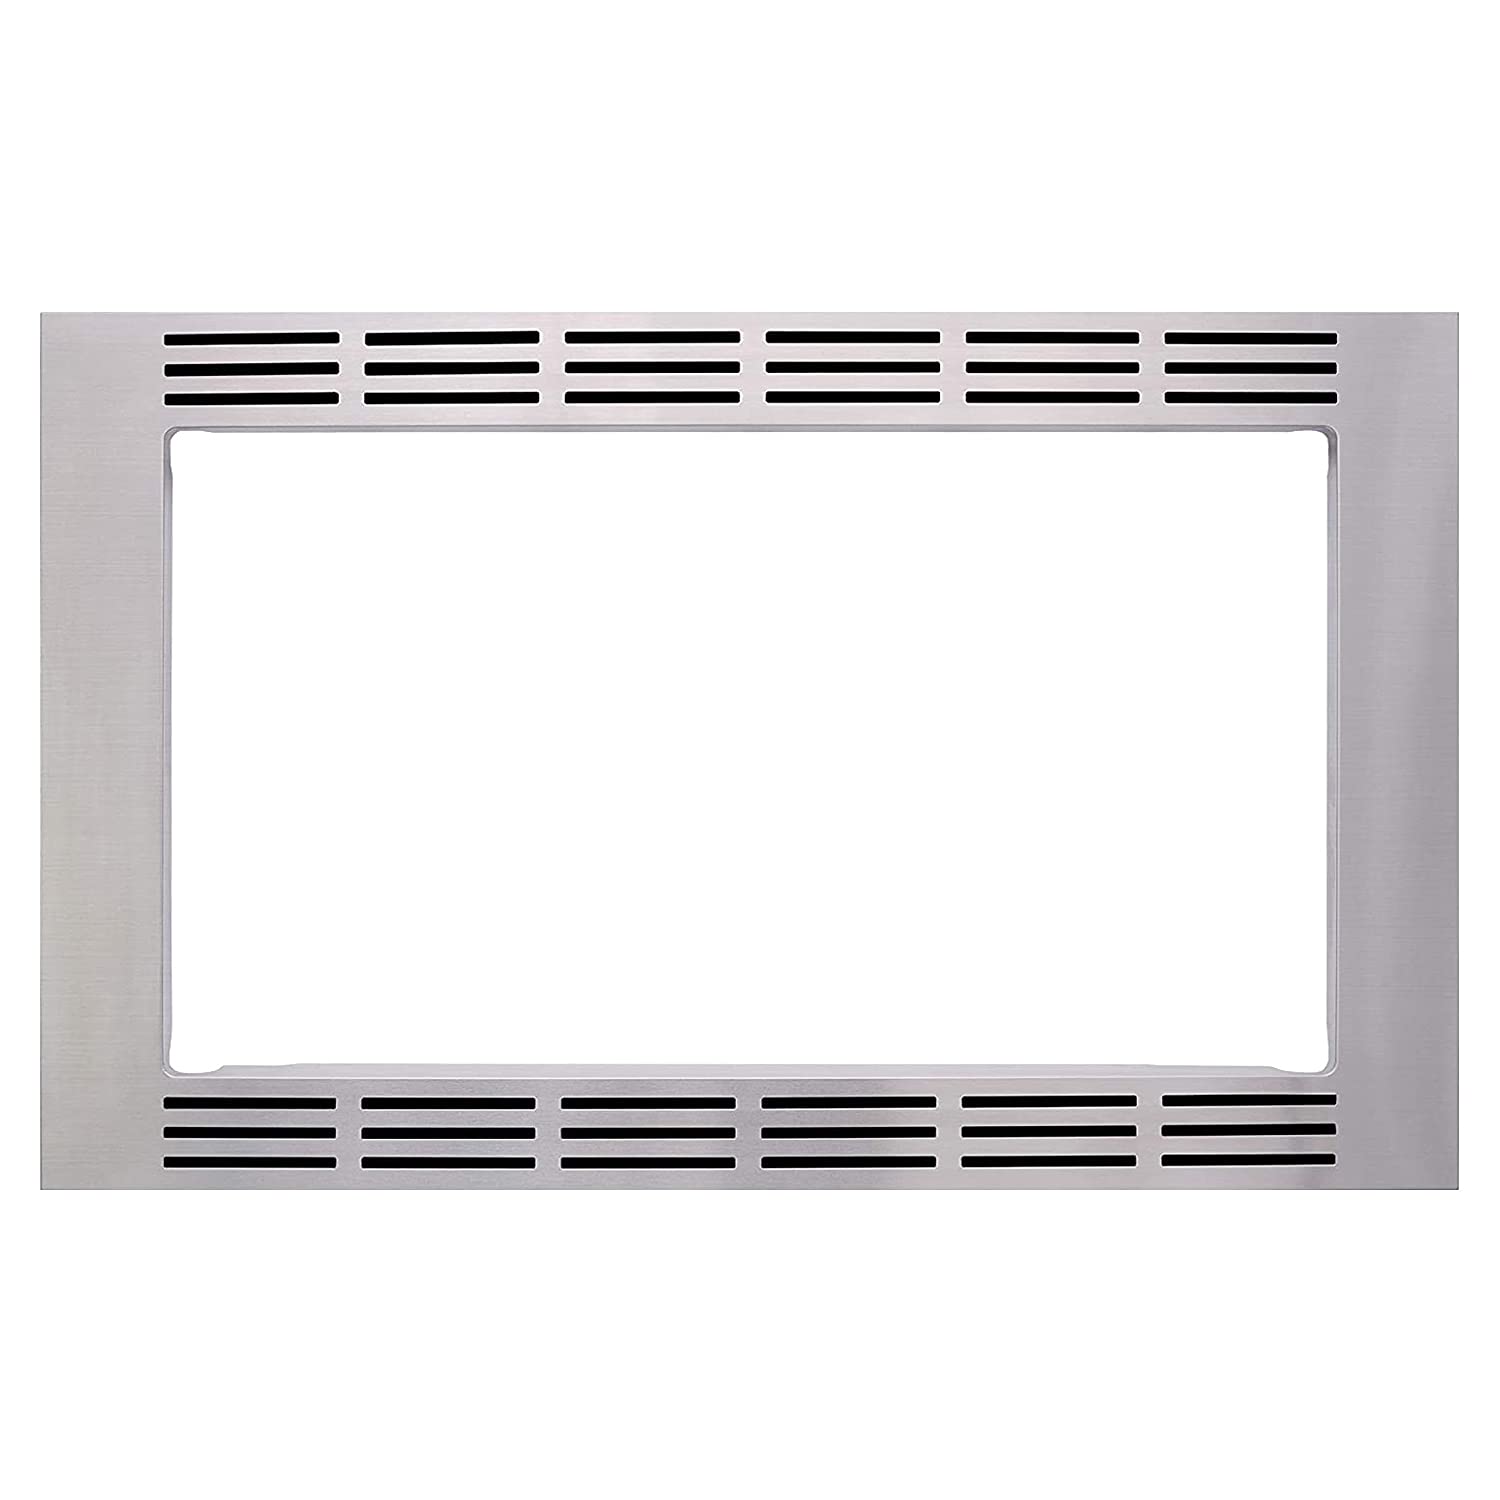 Panasonic NN-TK932SS 30-inch Trim Kit for 2.2 cu ft Microwave Ovens, Stainless Steel